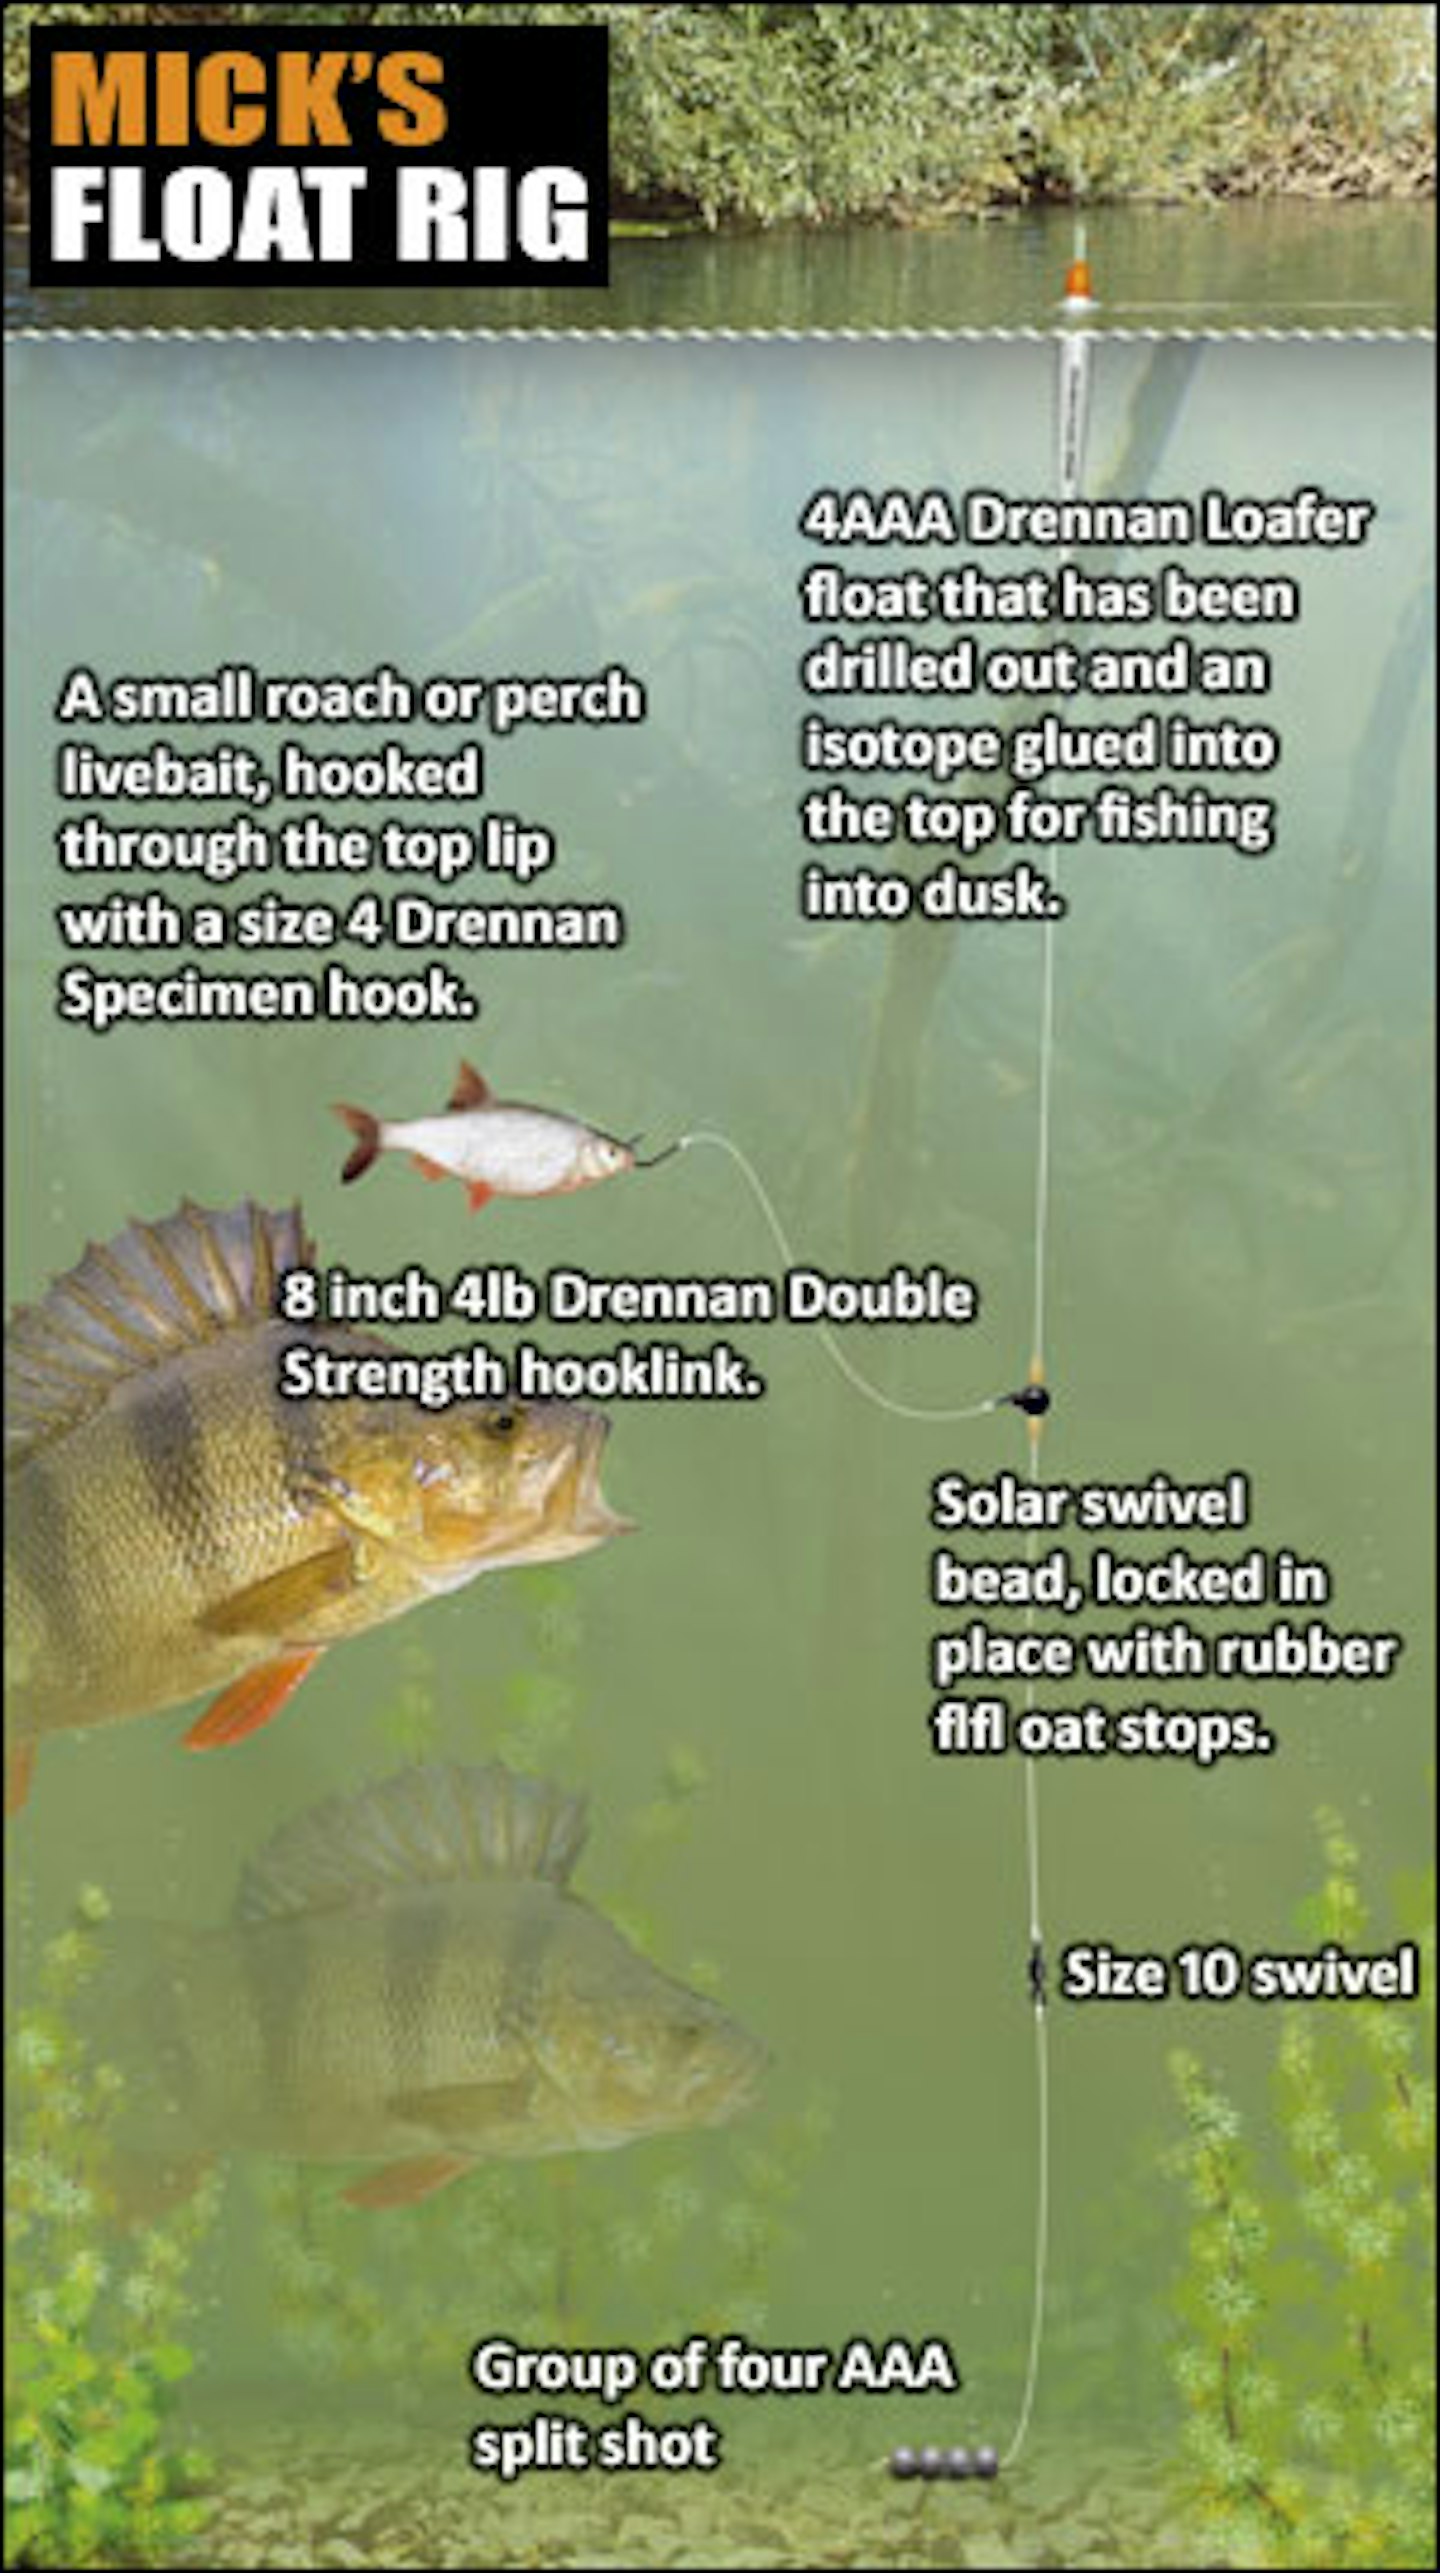 Float fishing for perch by laying on - Amateur Angling